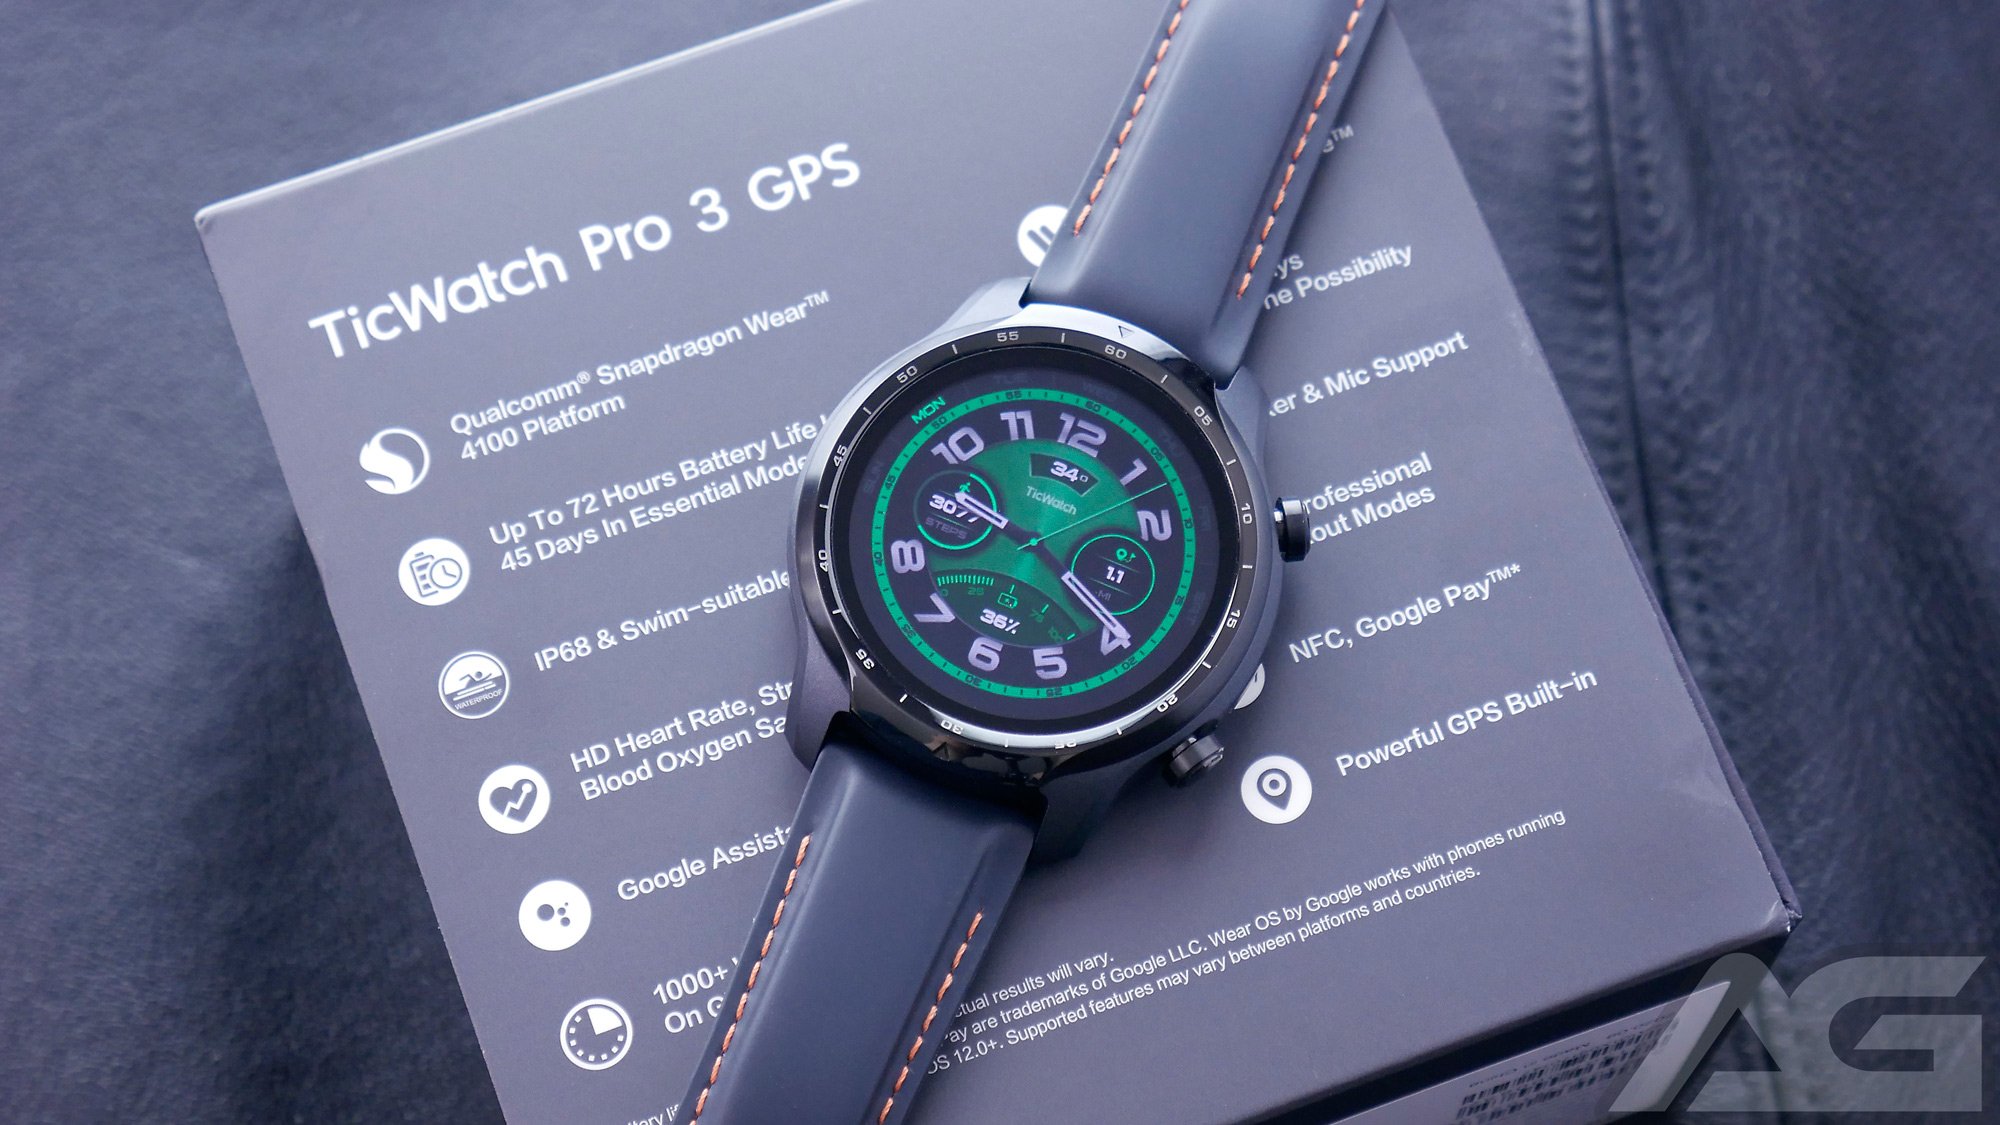 Mobvoi TicWatch Pro 3 GPS review